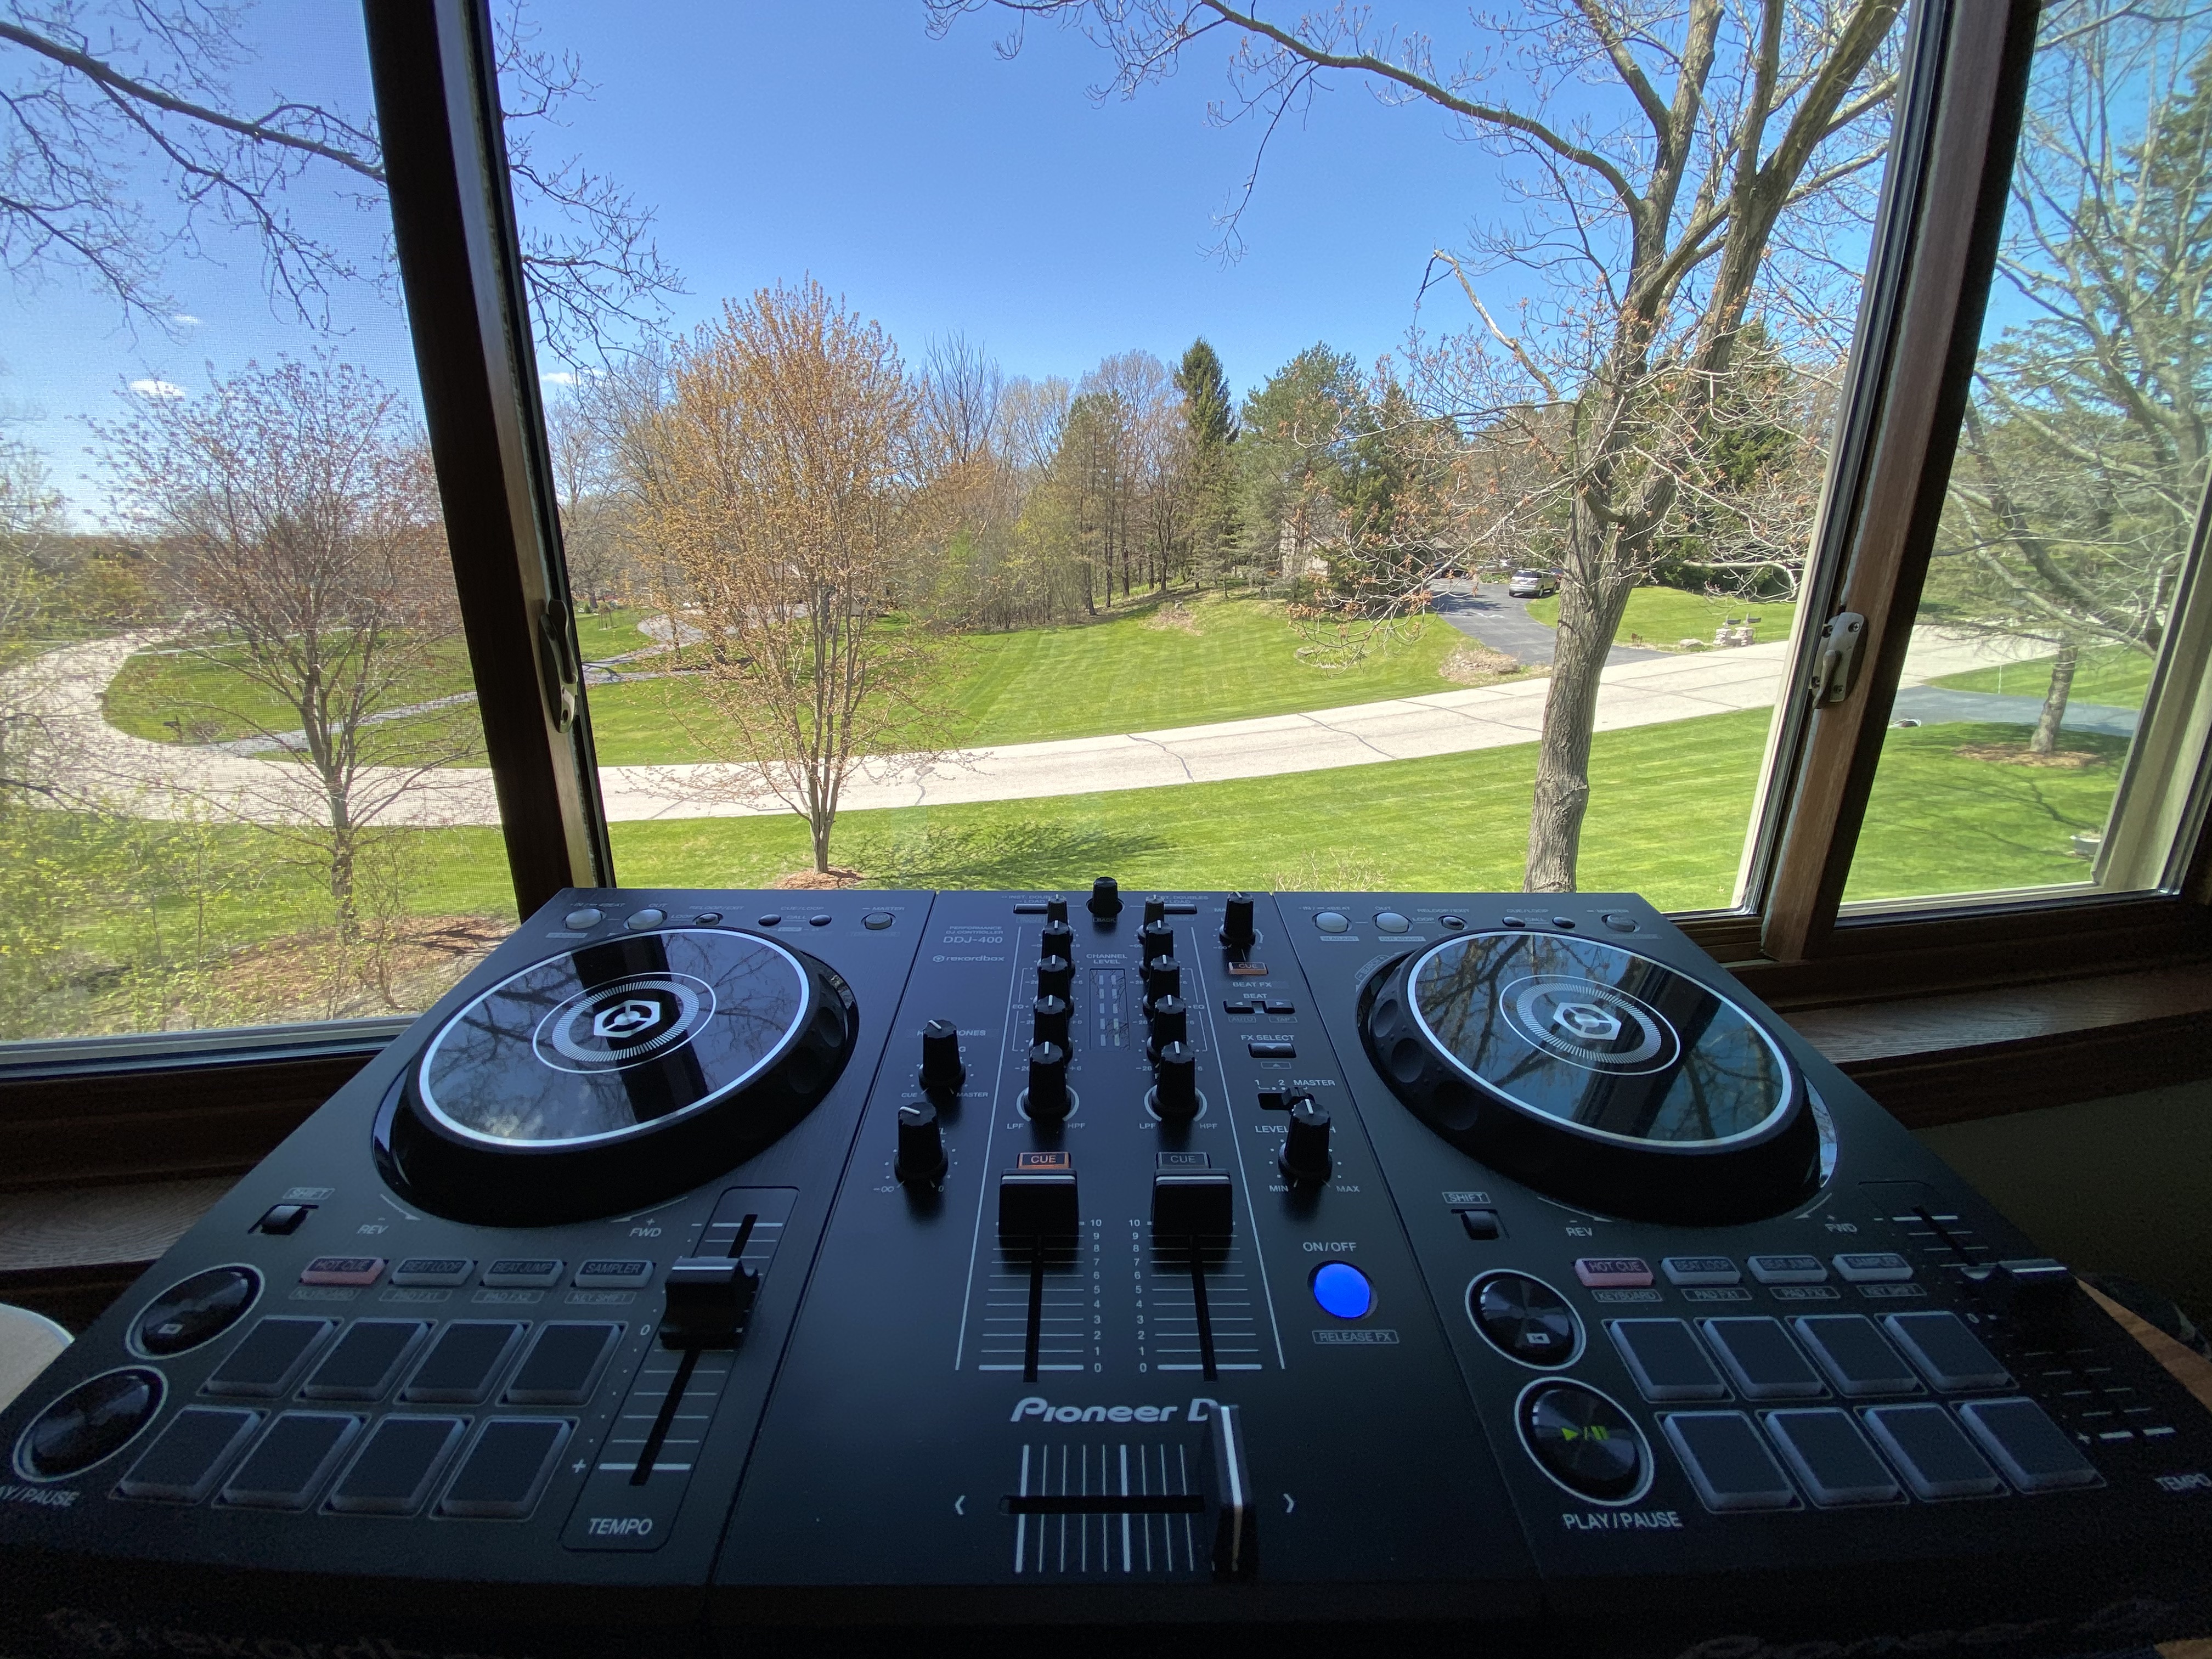 Photograph of a Pioneer DJ deck against the backdrop of my front yard through my office window